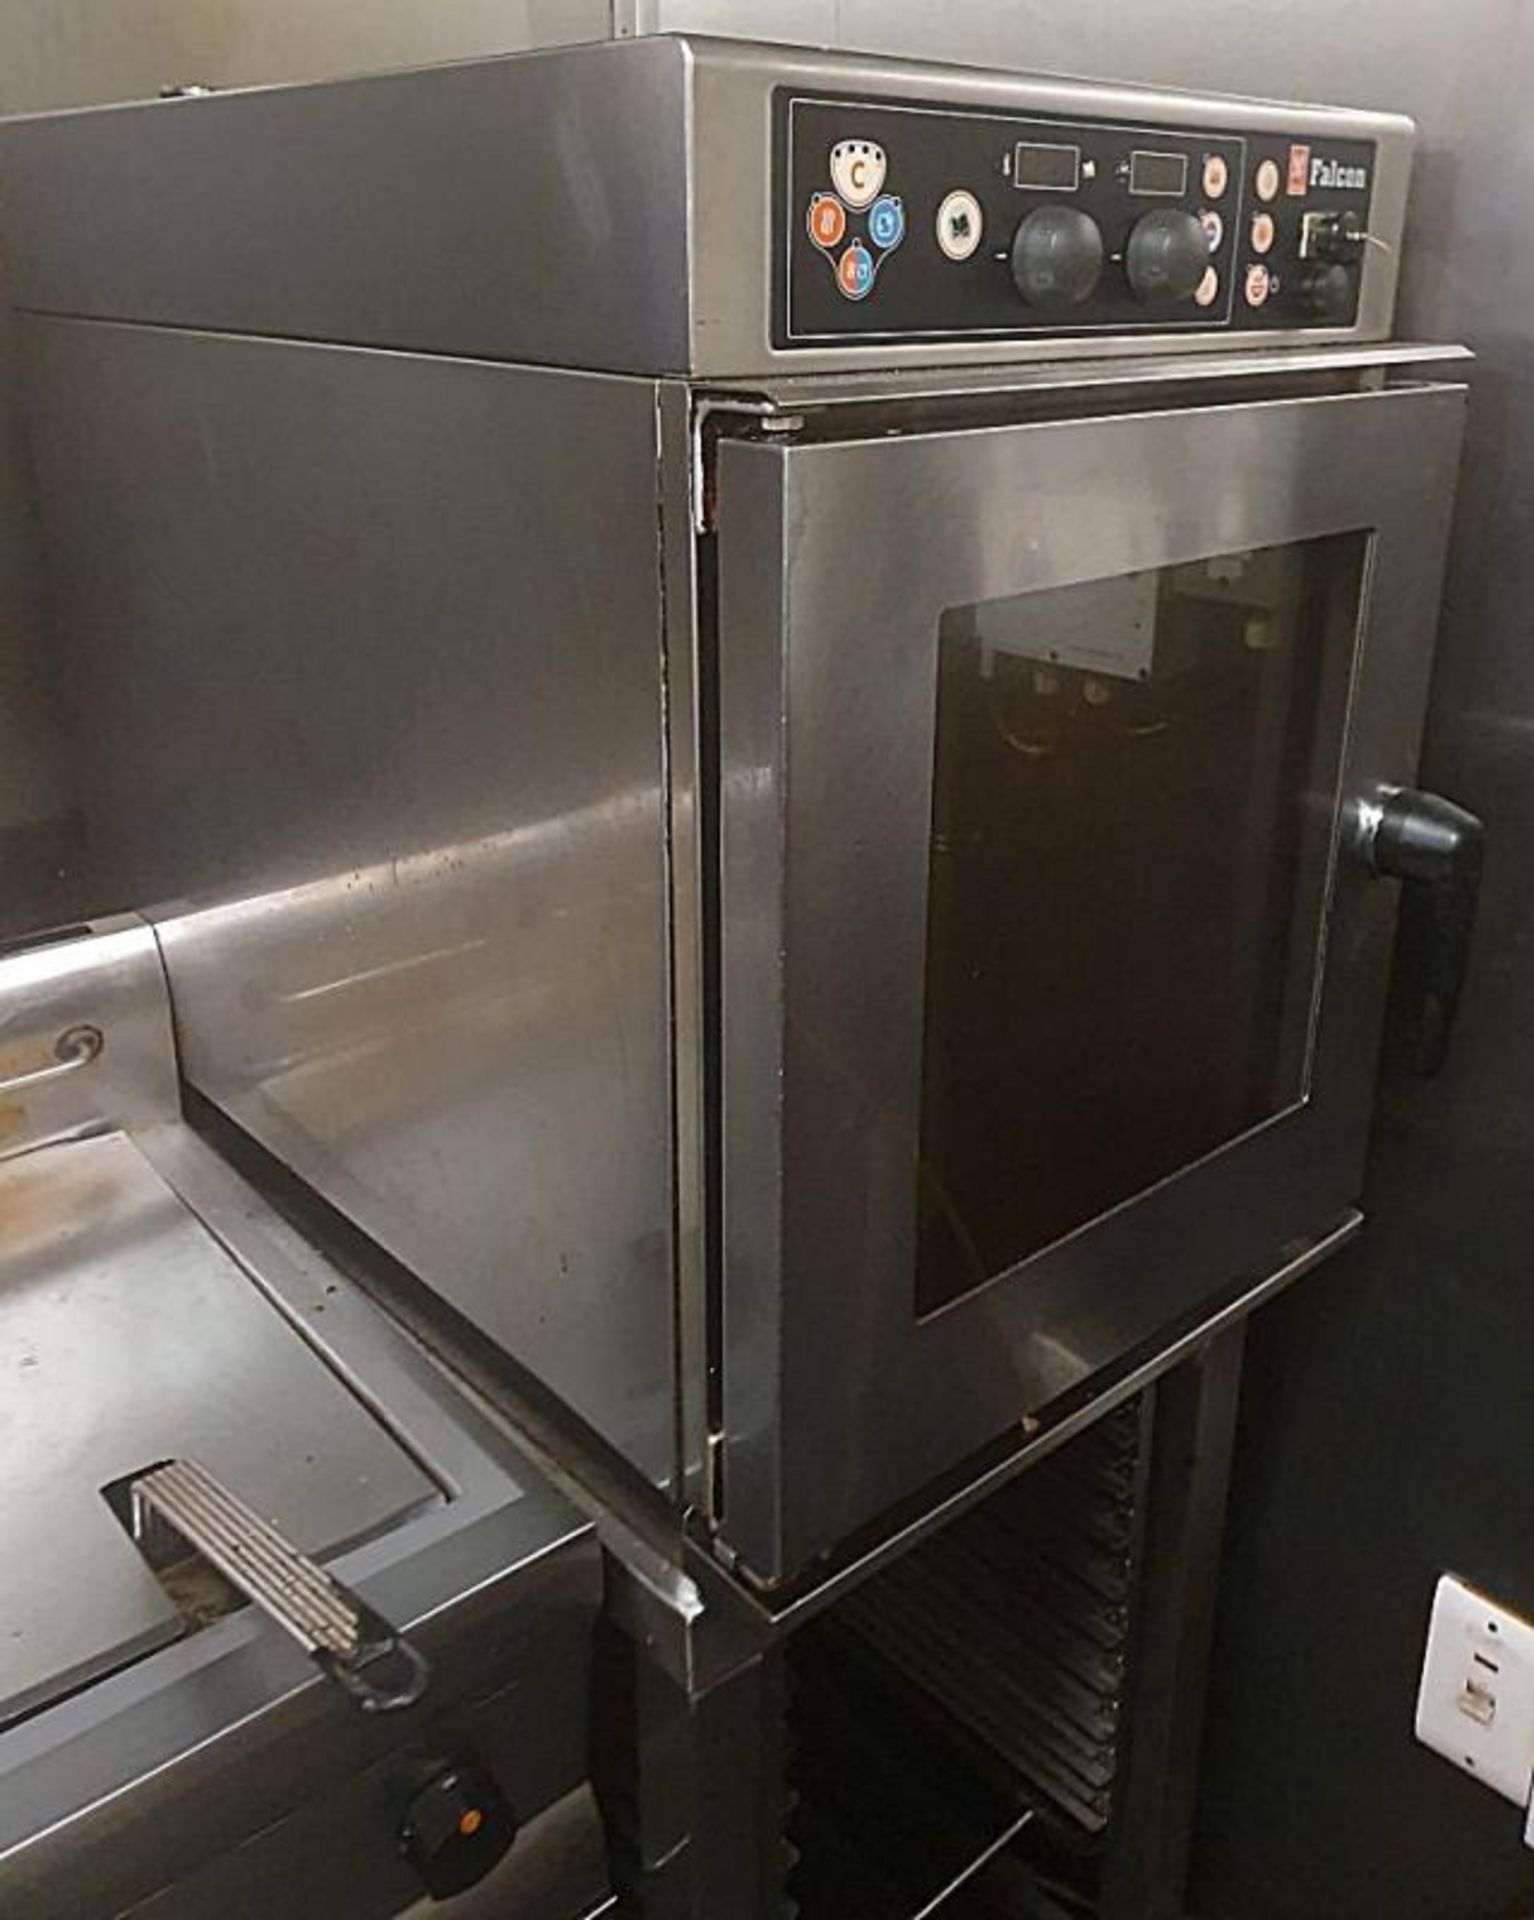 1 x FALCON Commercial 6-Grid Electric Combi Oven In Stainless Steel - Dimensions: 51 x 80 x H73cm + - Image 3 of 5